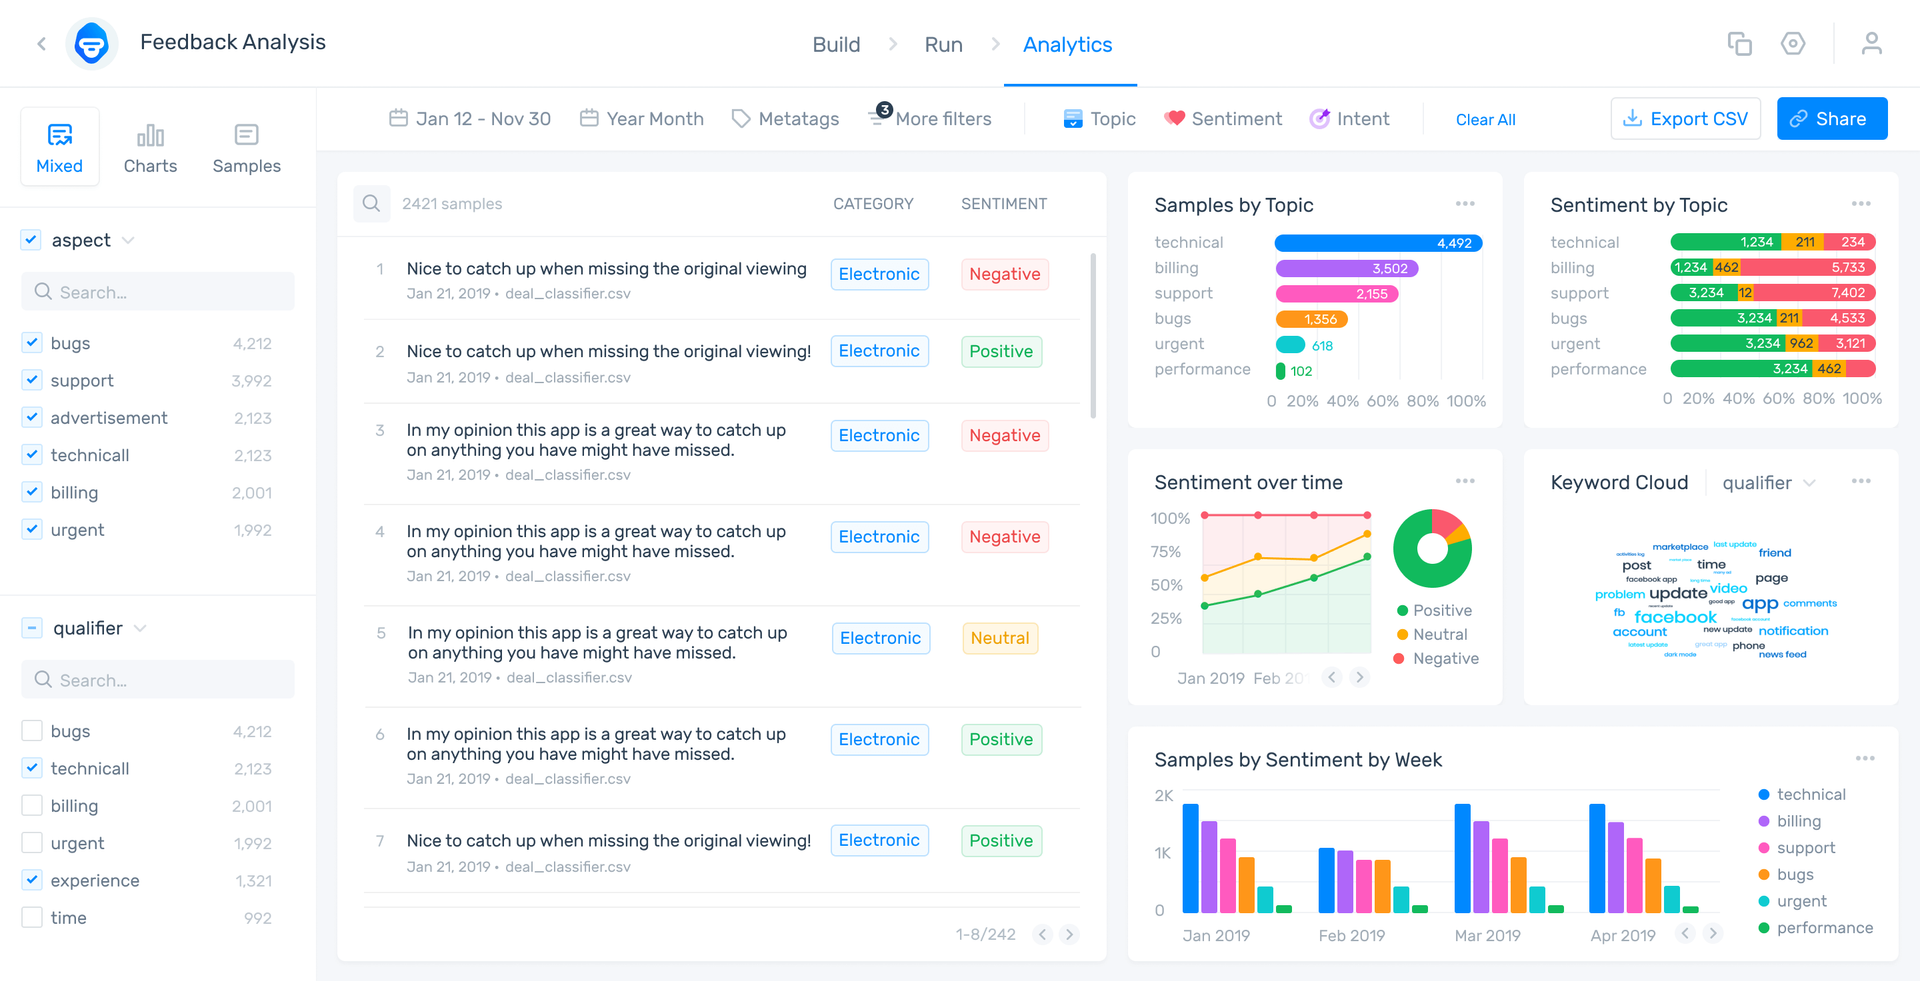 MonkeyLearn Studio showing sentiment around different topics in customer feedback. Filter by bugs, support, and more, to analyze data in minute detail.